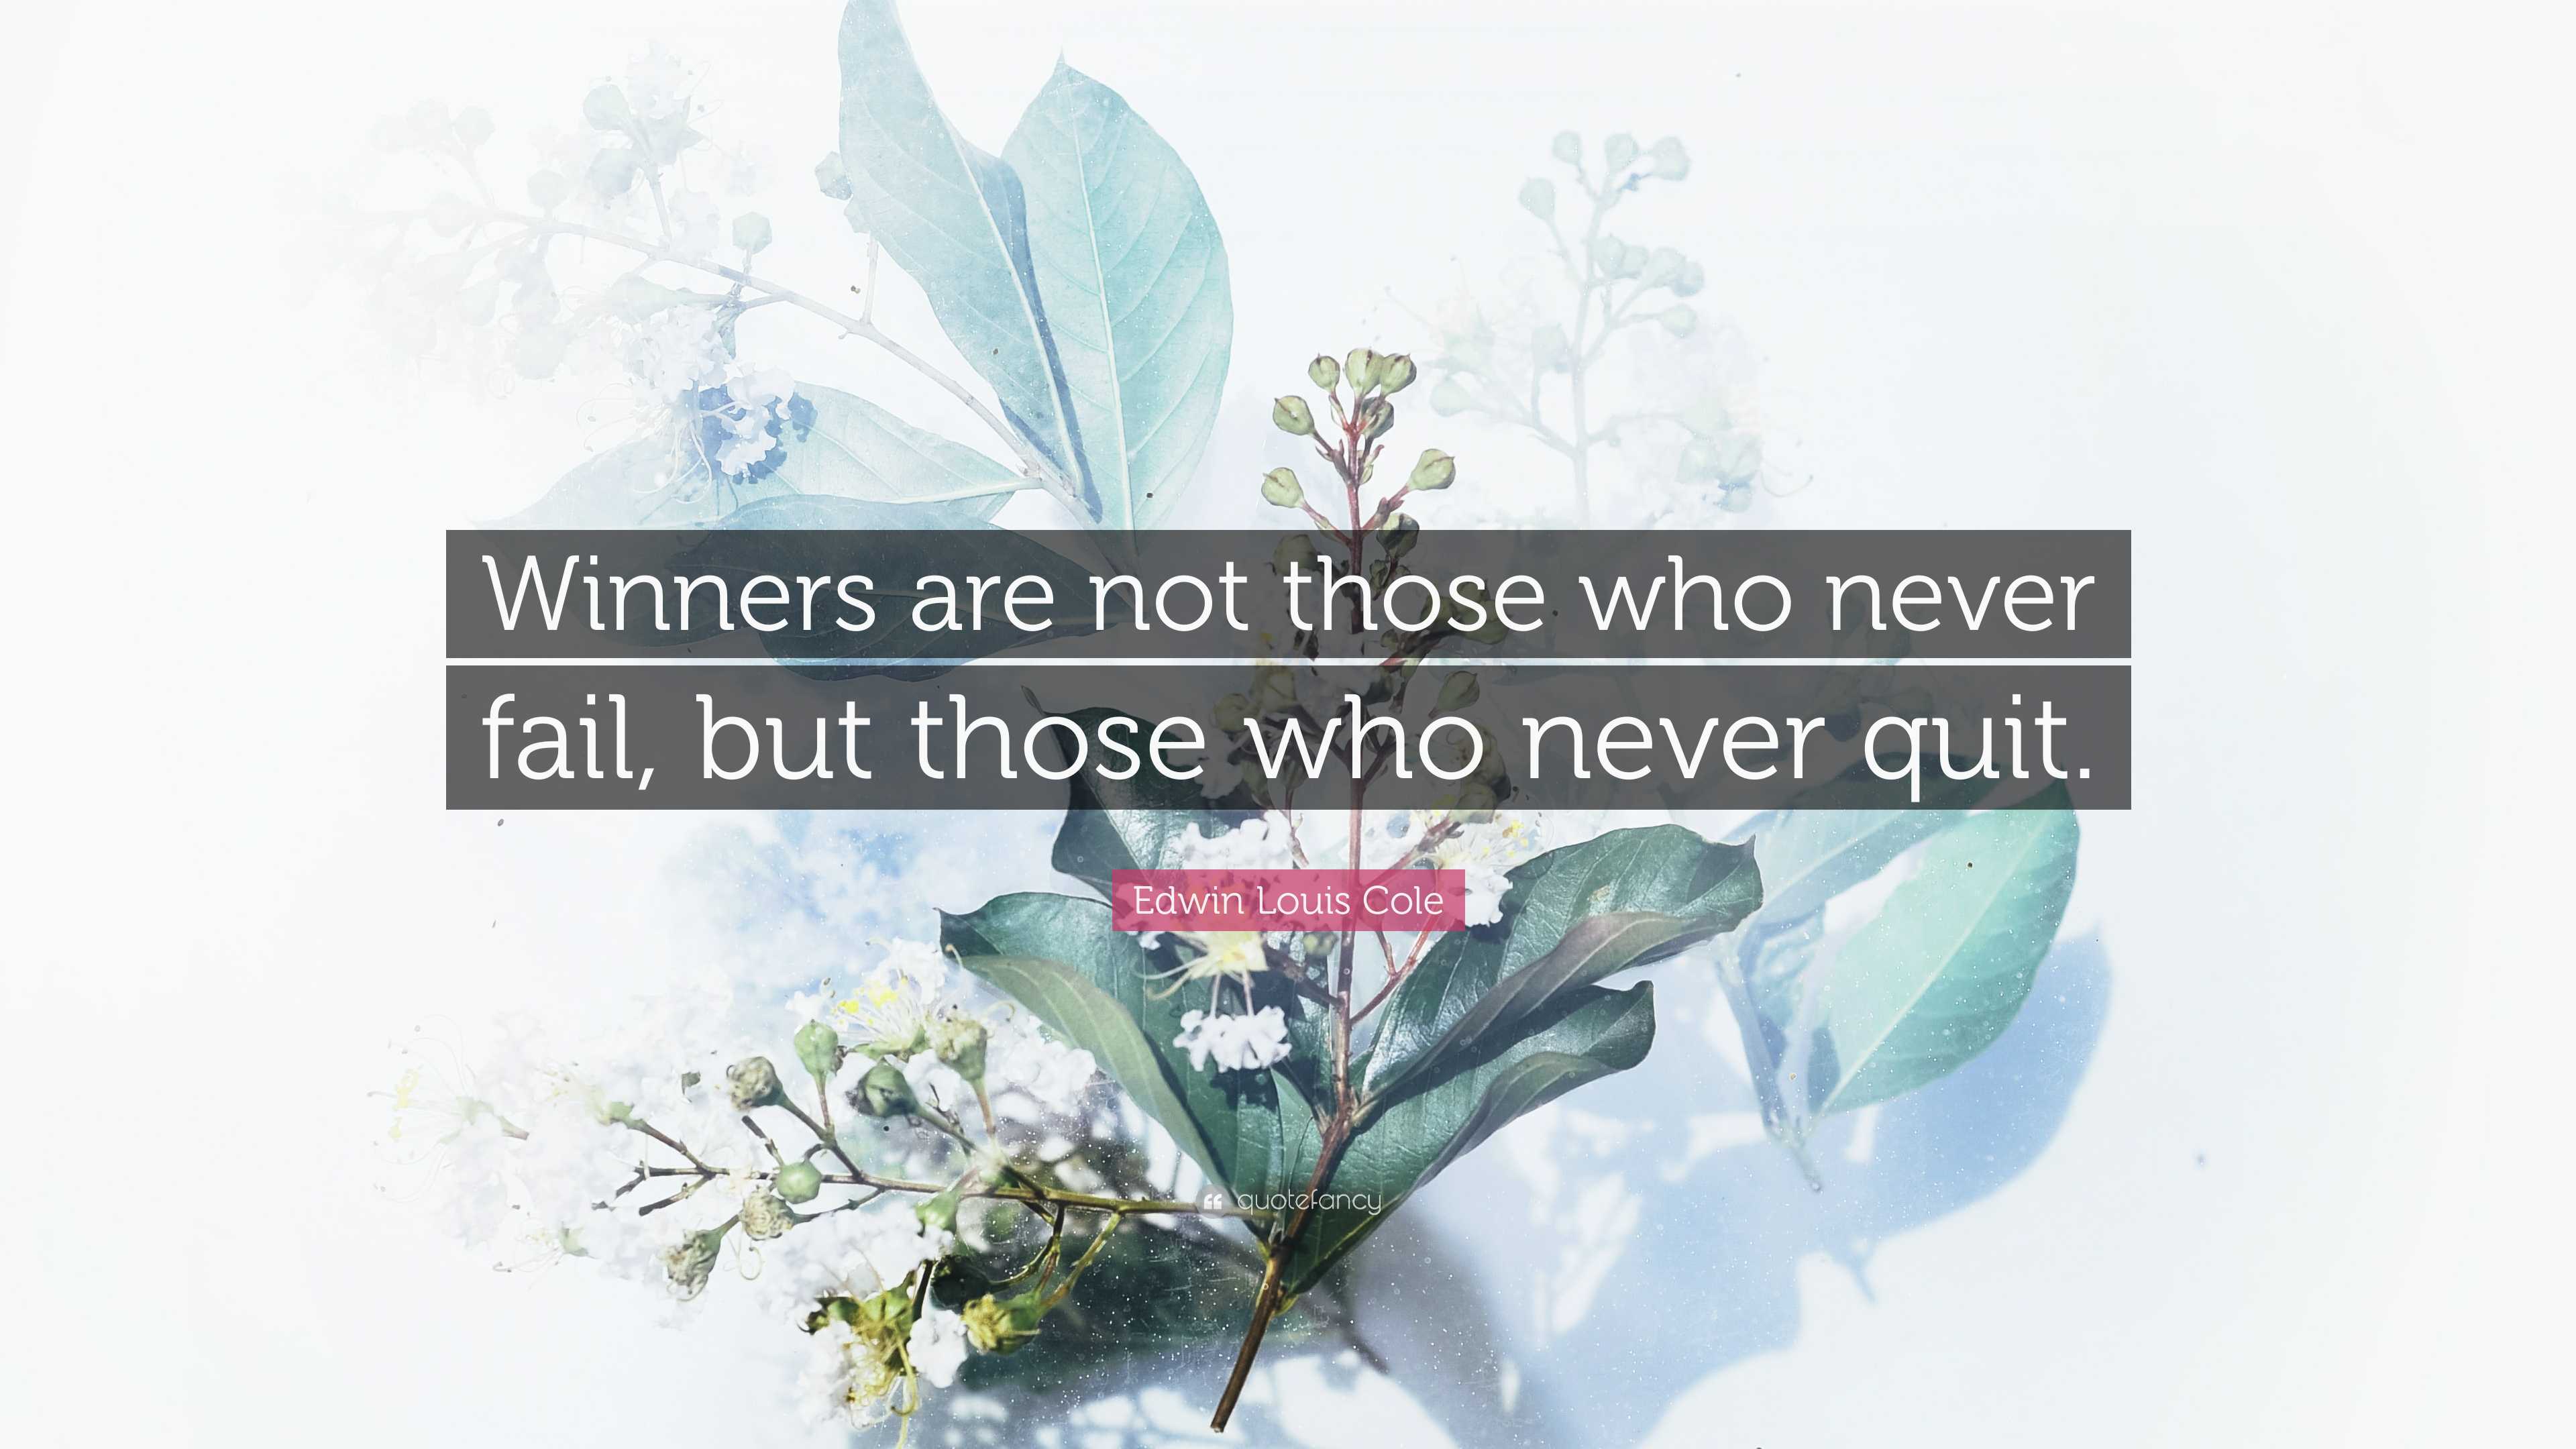 Winners are Not Those who Never Fail, But Those who Never Quit [Book]